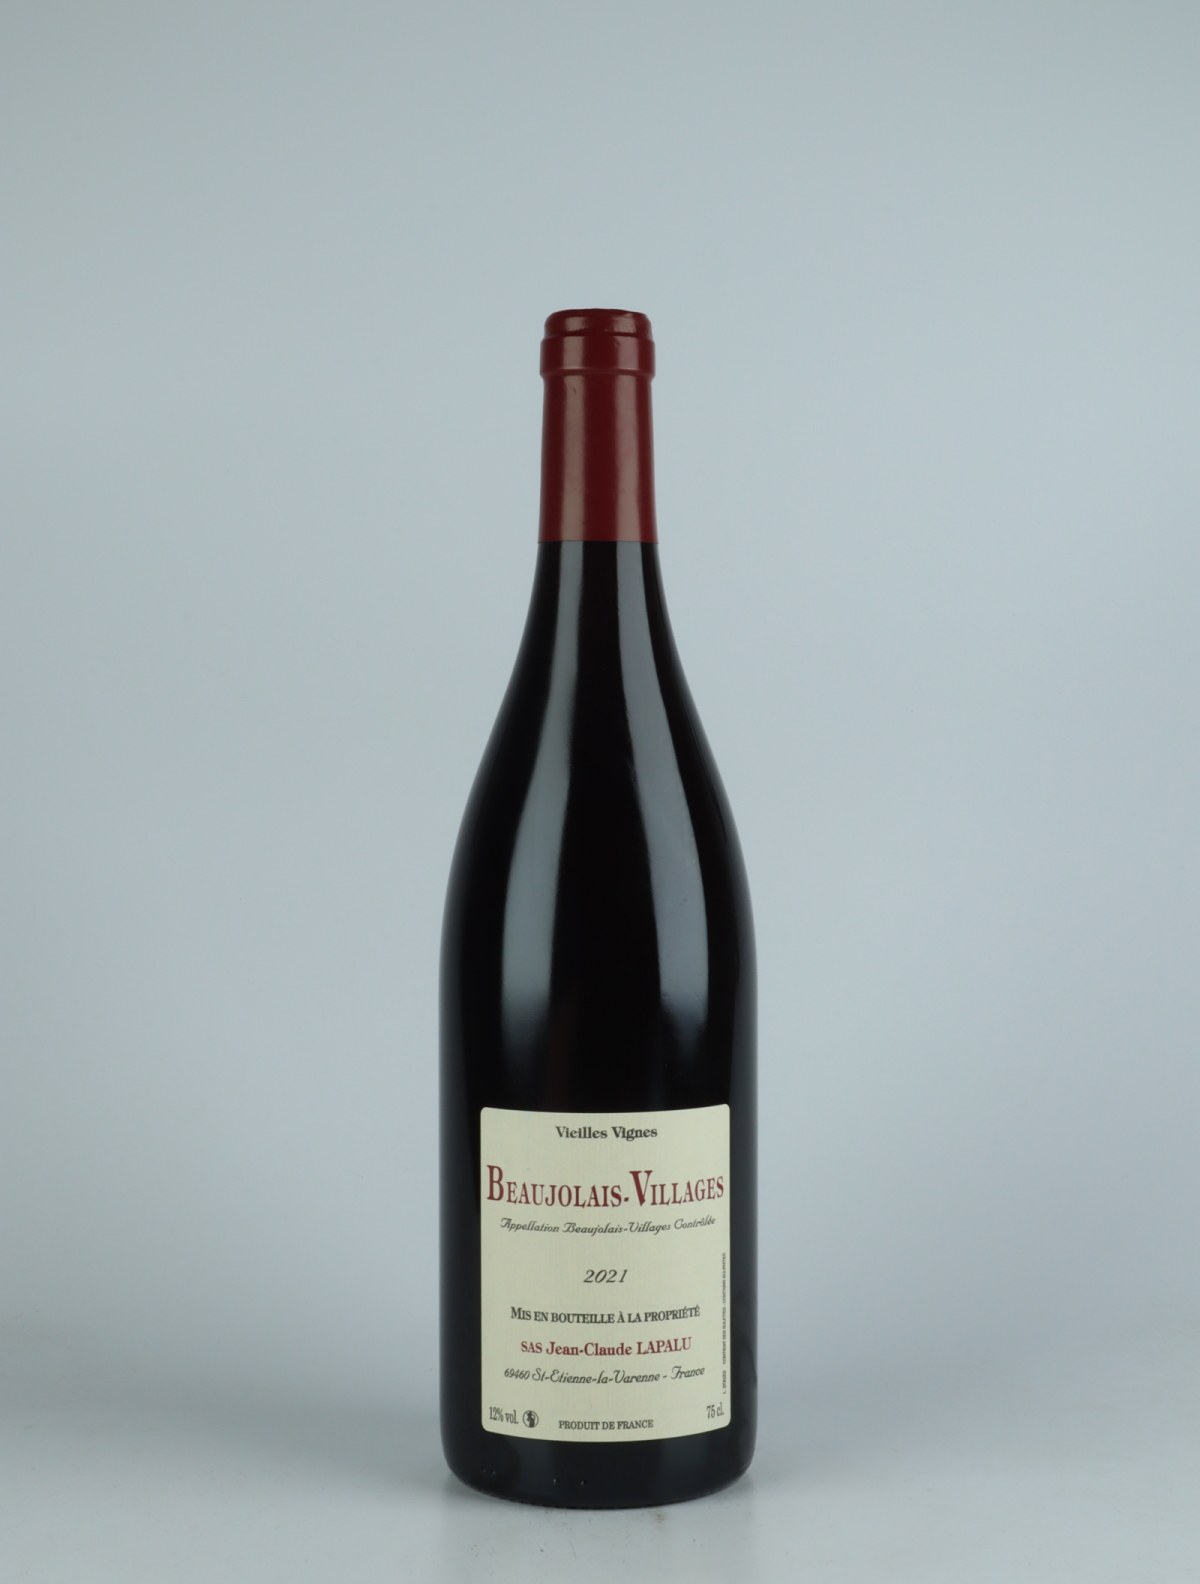 A bottle 2021 Beaujolais Villages - Vieilles Vignes Red wine from Jean-Claude Lapalu, Beaujolais in France